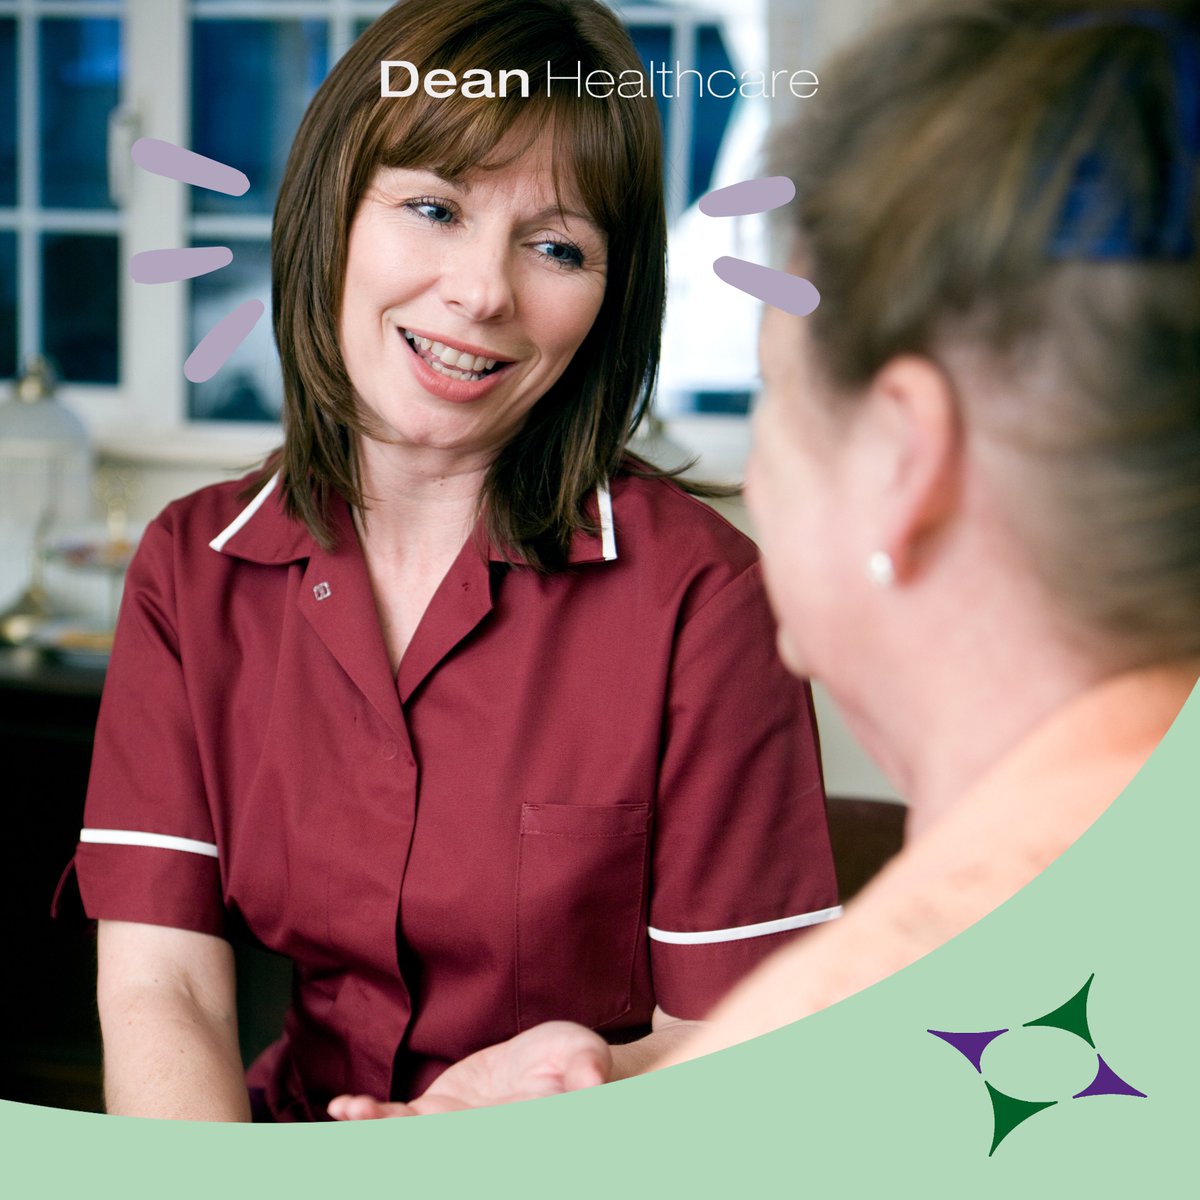 Healthcare workers are the unsung heroes of our society, tirelessly working to heal, comfort, and care for those in need!

Discover more at deanhealthcare.co.uk

#healthcare #healthcareheroes #healthcareworkers #care #carer #supportwork #supportworker #quote #quoteoftheday